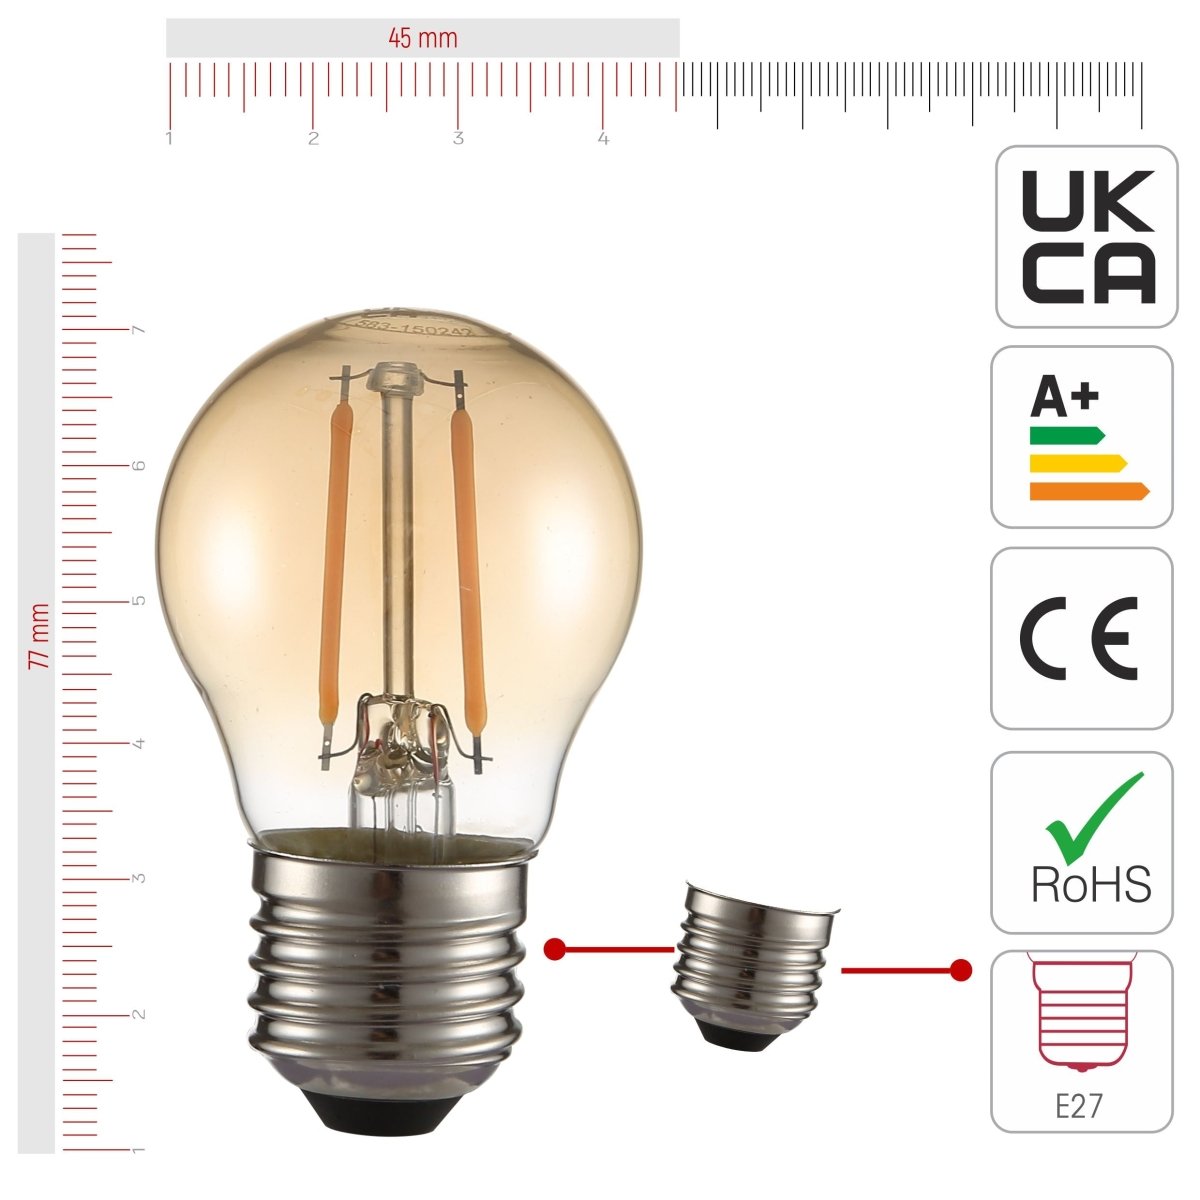 Size and certifications of LED Filament Bulb G45 Golf Ball E27 Edison Screw 2W 220lm Warm White 2400K Amber Pack of 4 | TEKLED 583-150242